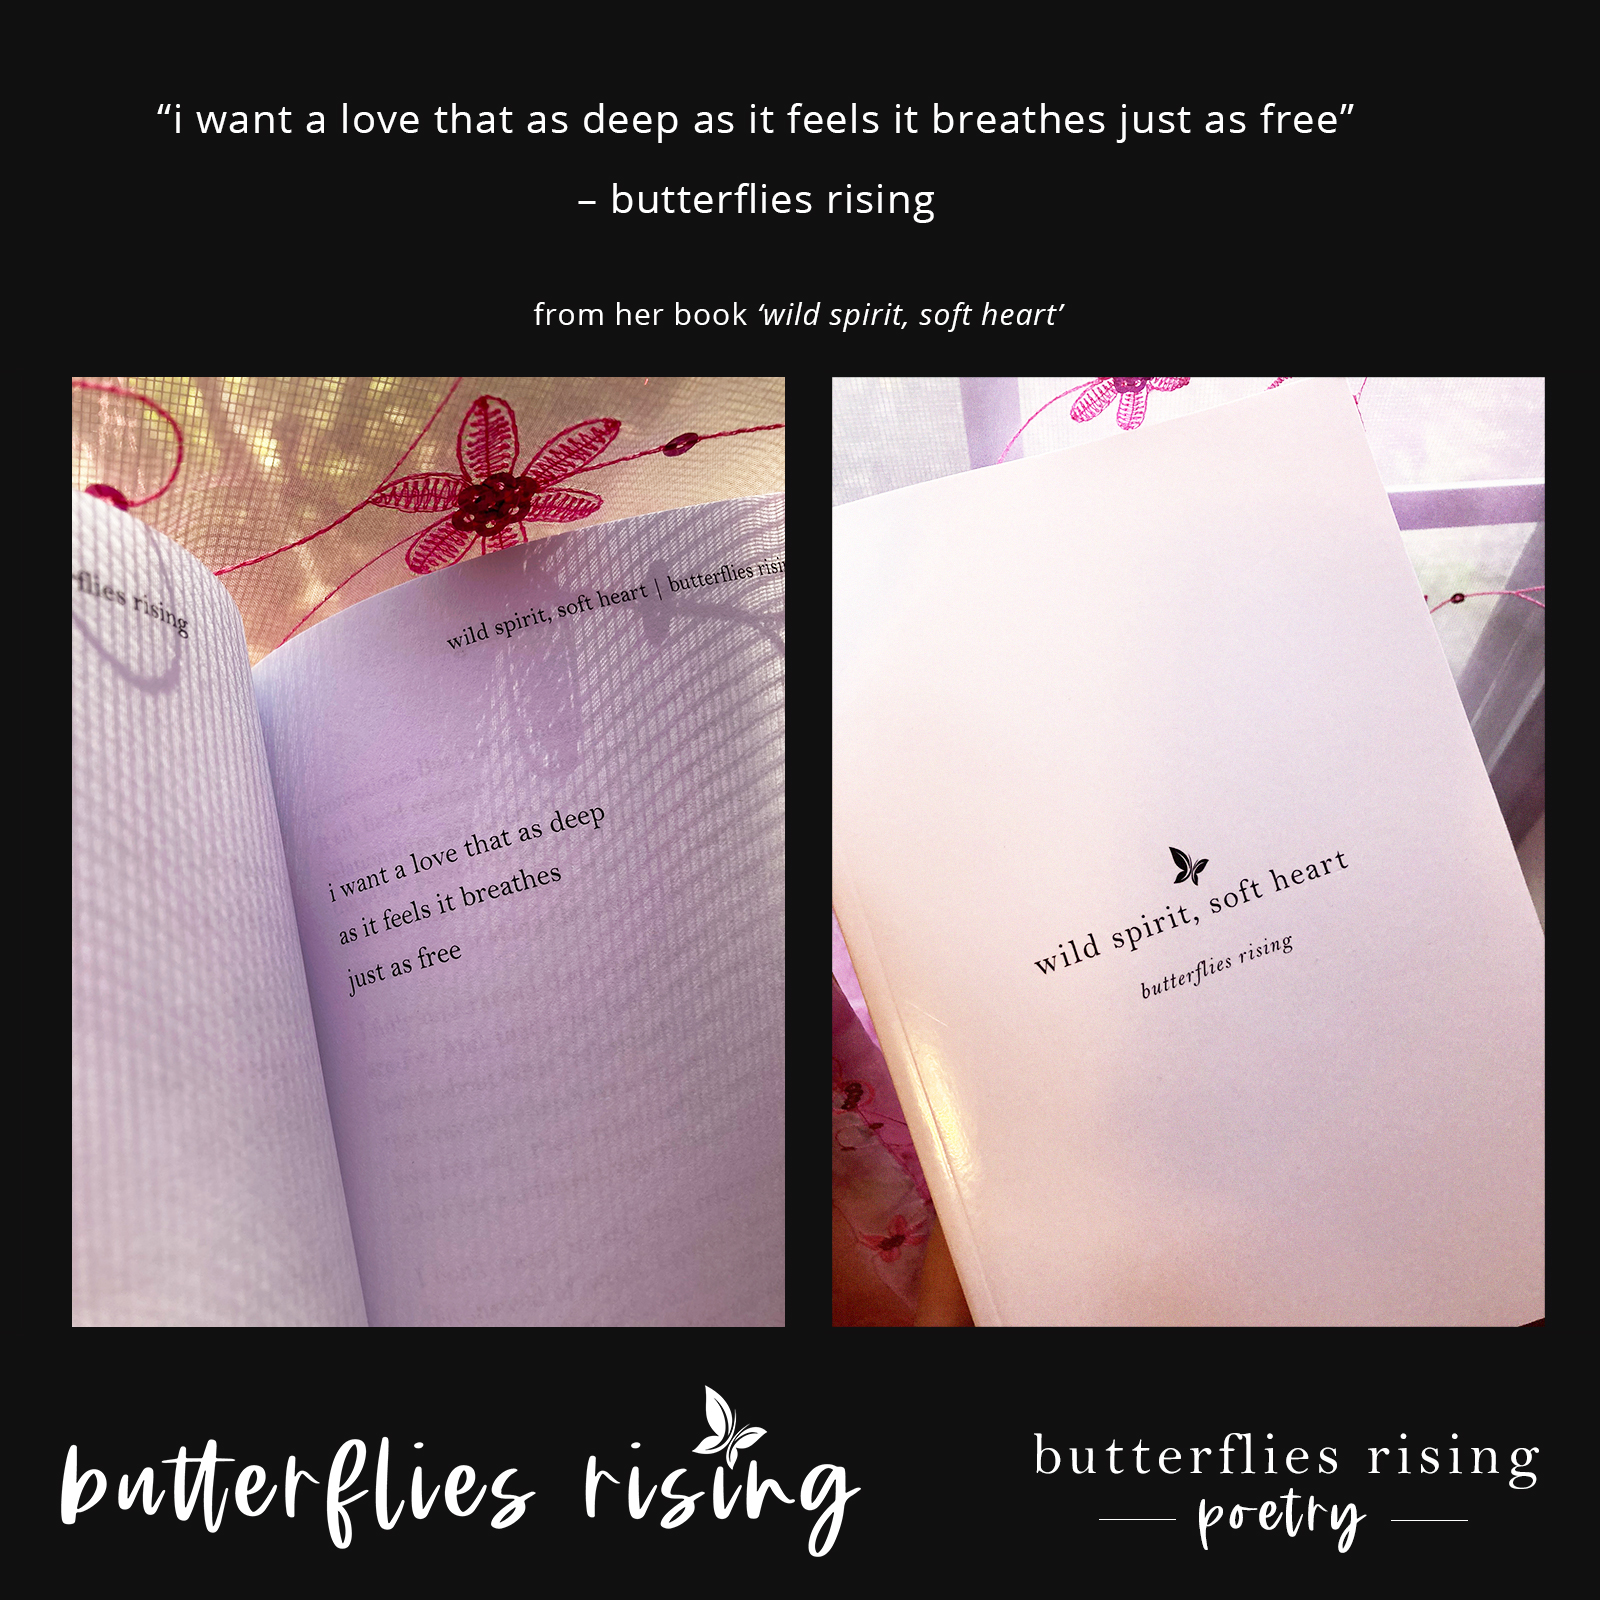 i want a love that as deep as it feels it breathes just as free - butterflies rising